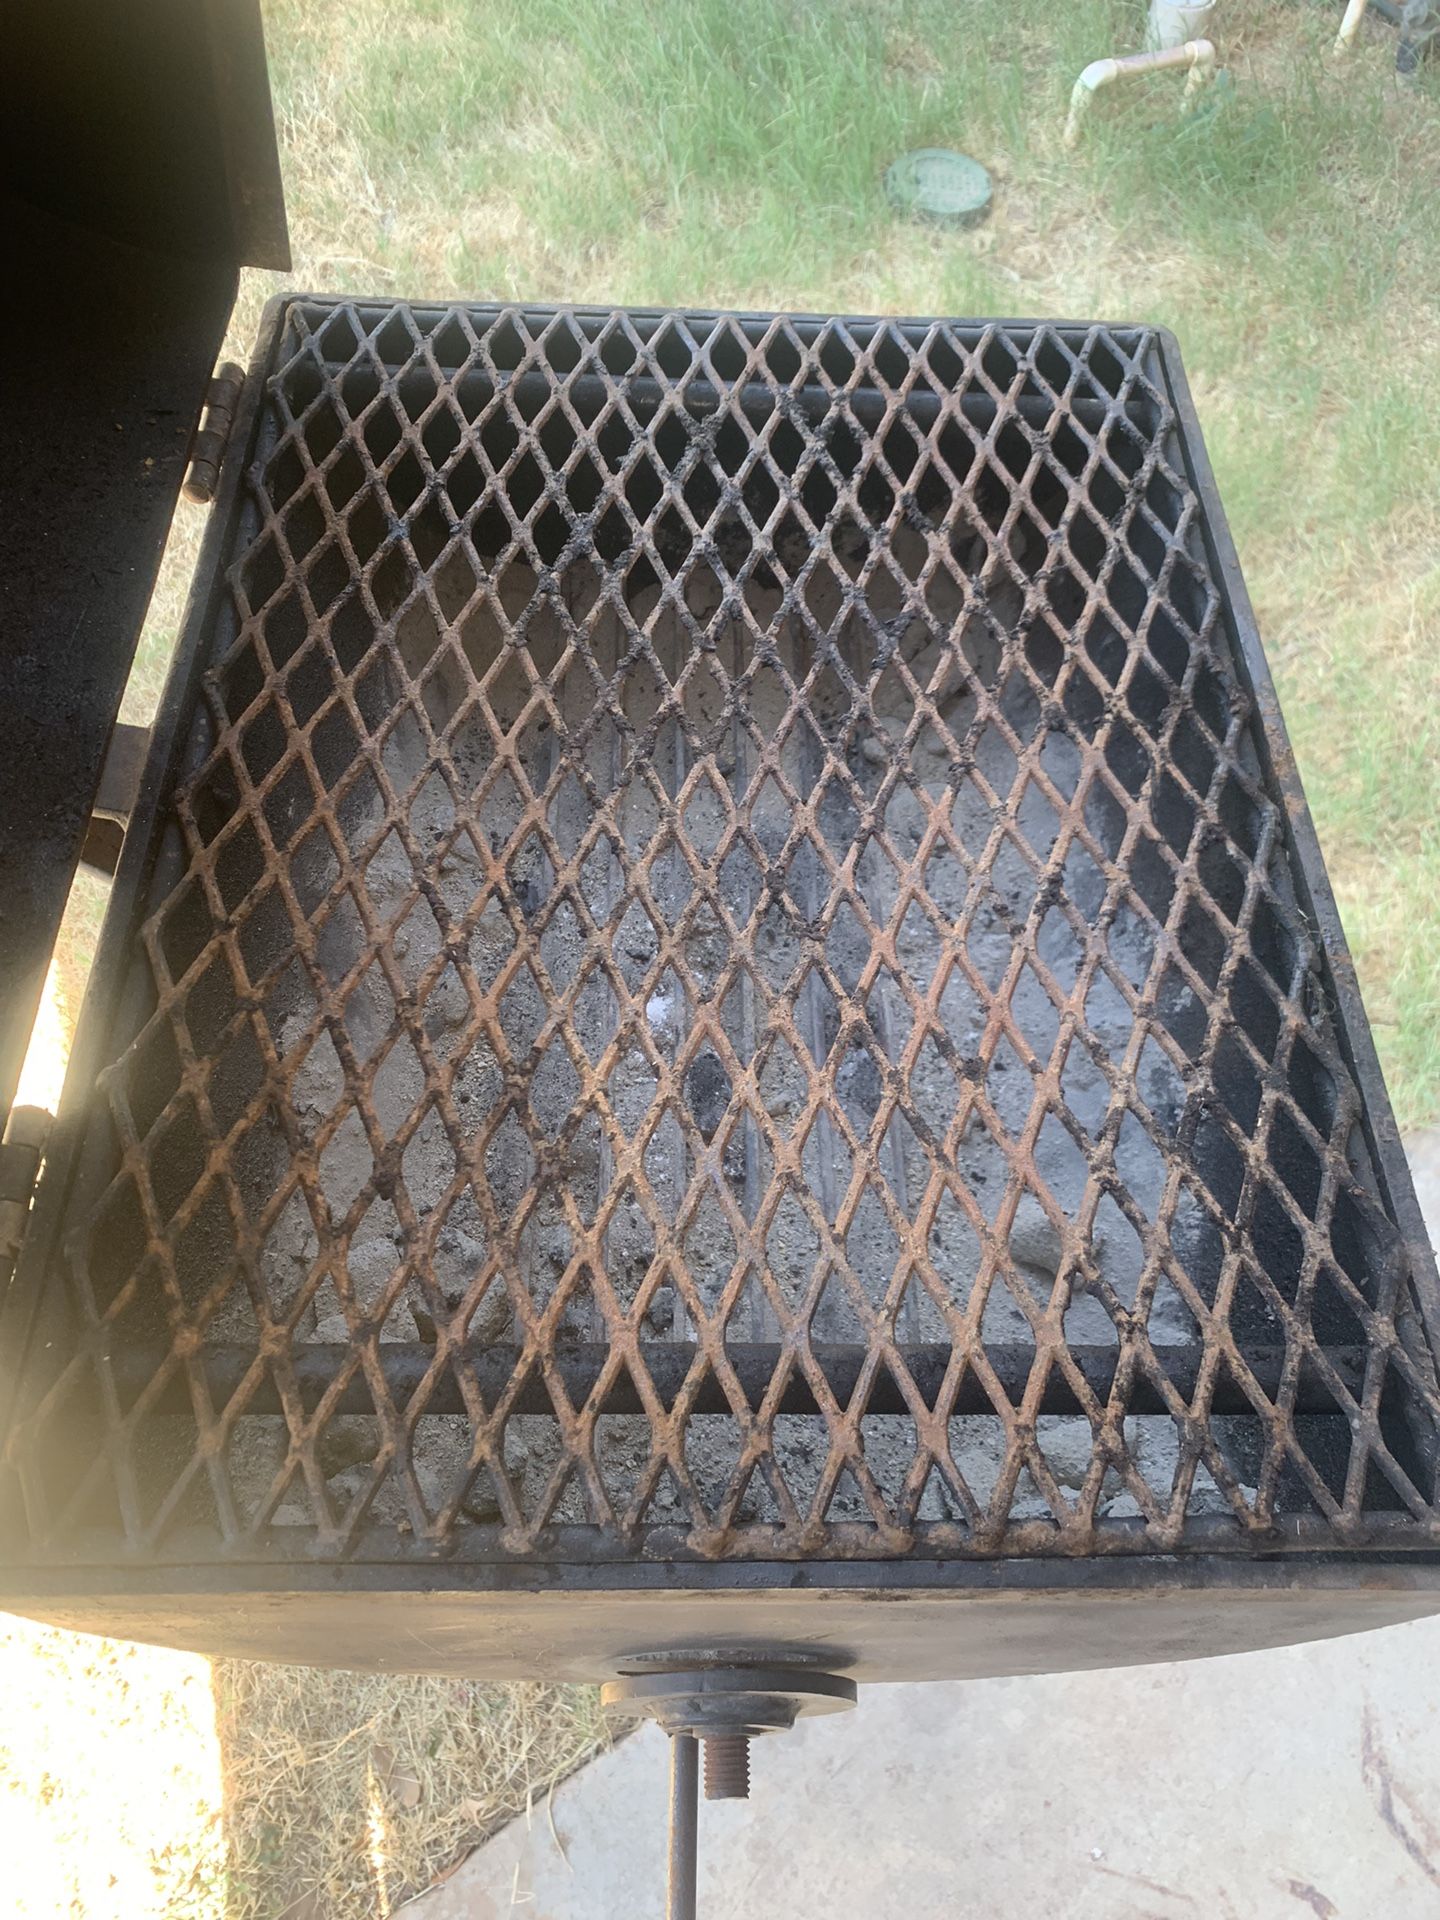 Homemade Bbq Grill 